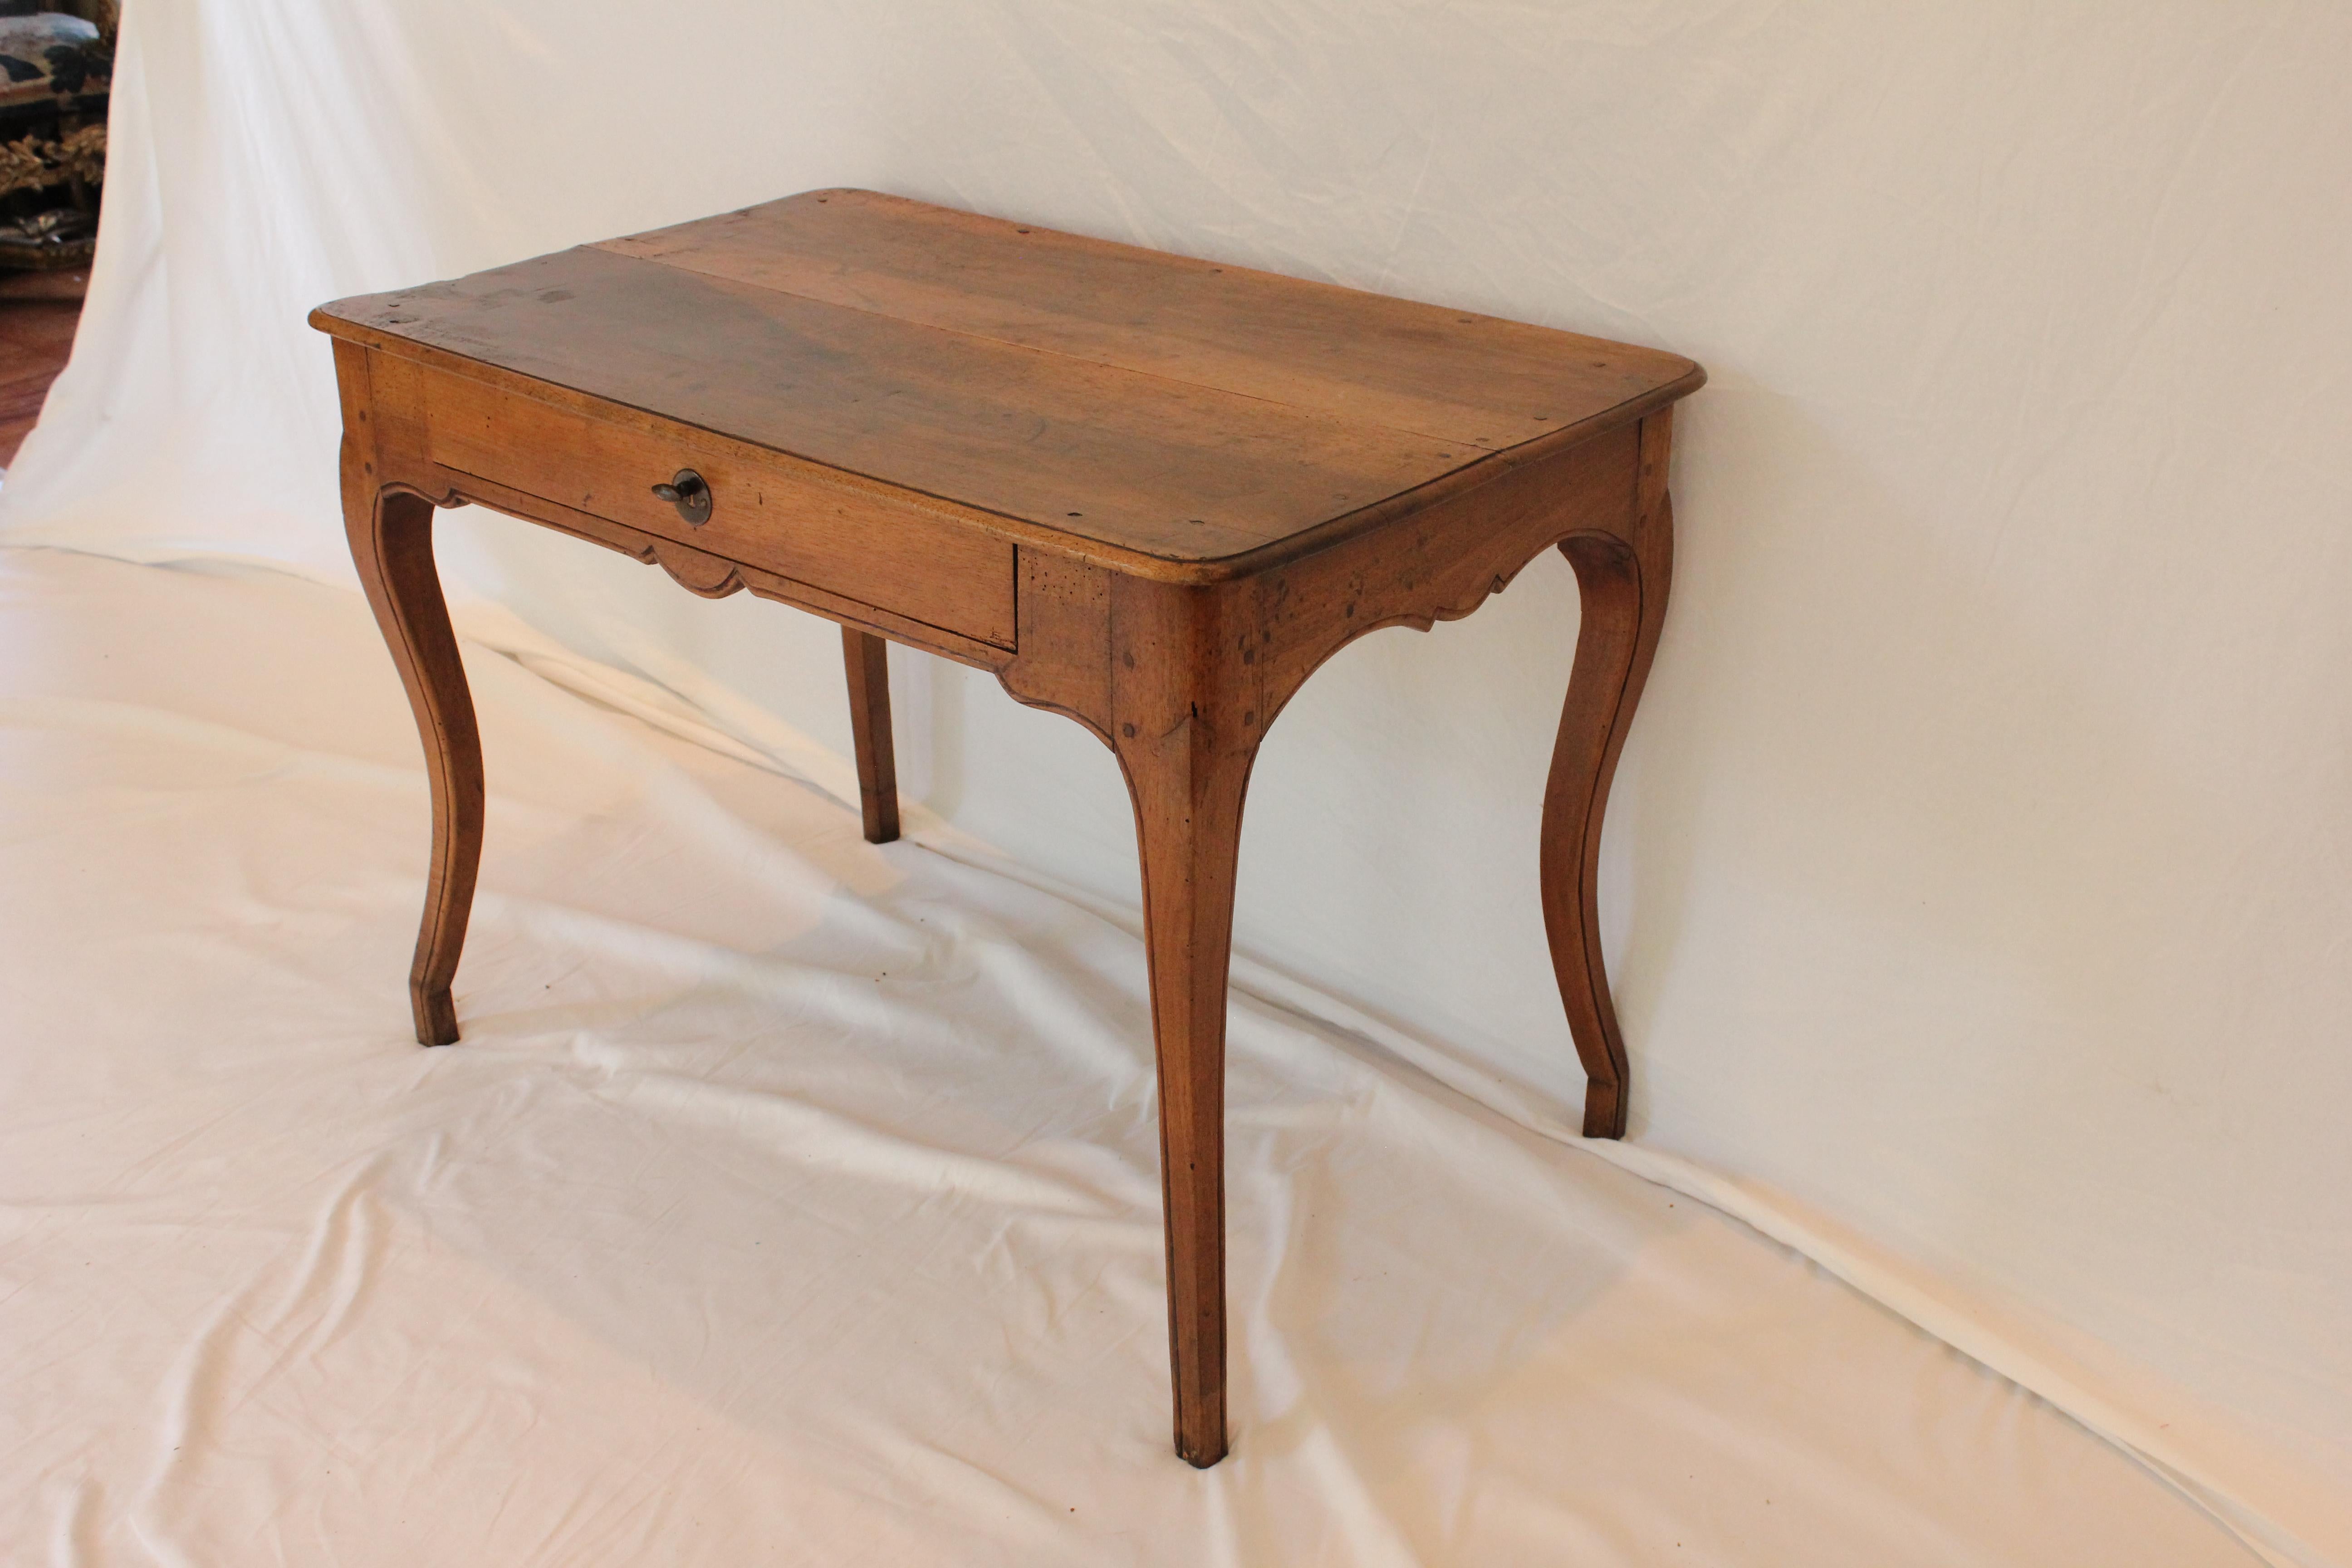 Hand-Crafted Antique French Provincial Fruitwood Writing Table / Desk W/ Drawer Early 19th C For Sale